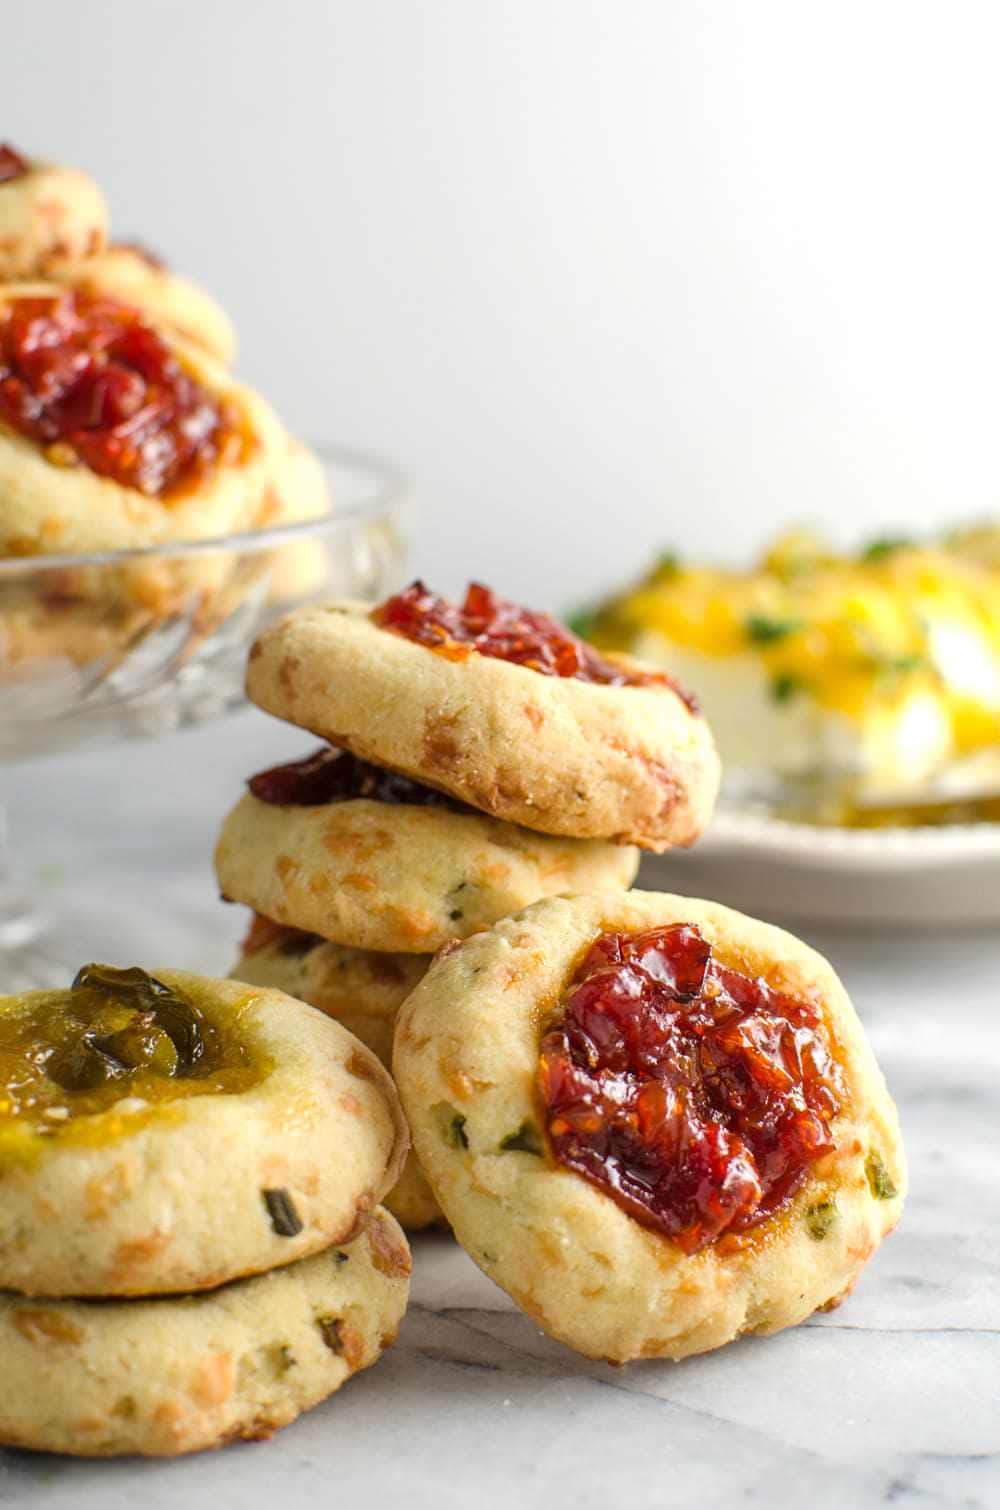 Savory Cheese Thumbprint Cookies with Bourbon Tomato Jam - These savory cookies are the NEXT BEST THING! Buttery, herby cookies with delicious cheddar cheese, and an amazing tomato jam! Comes together easily and its PERFECT as an appetizer, party food, or as a snack!